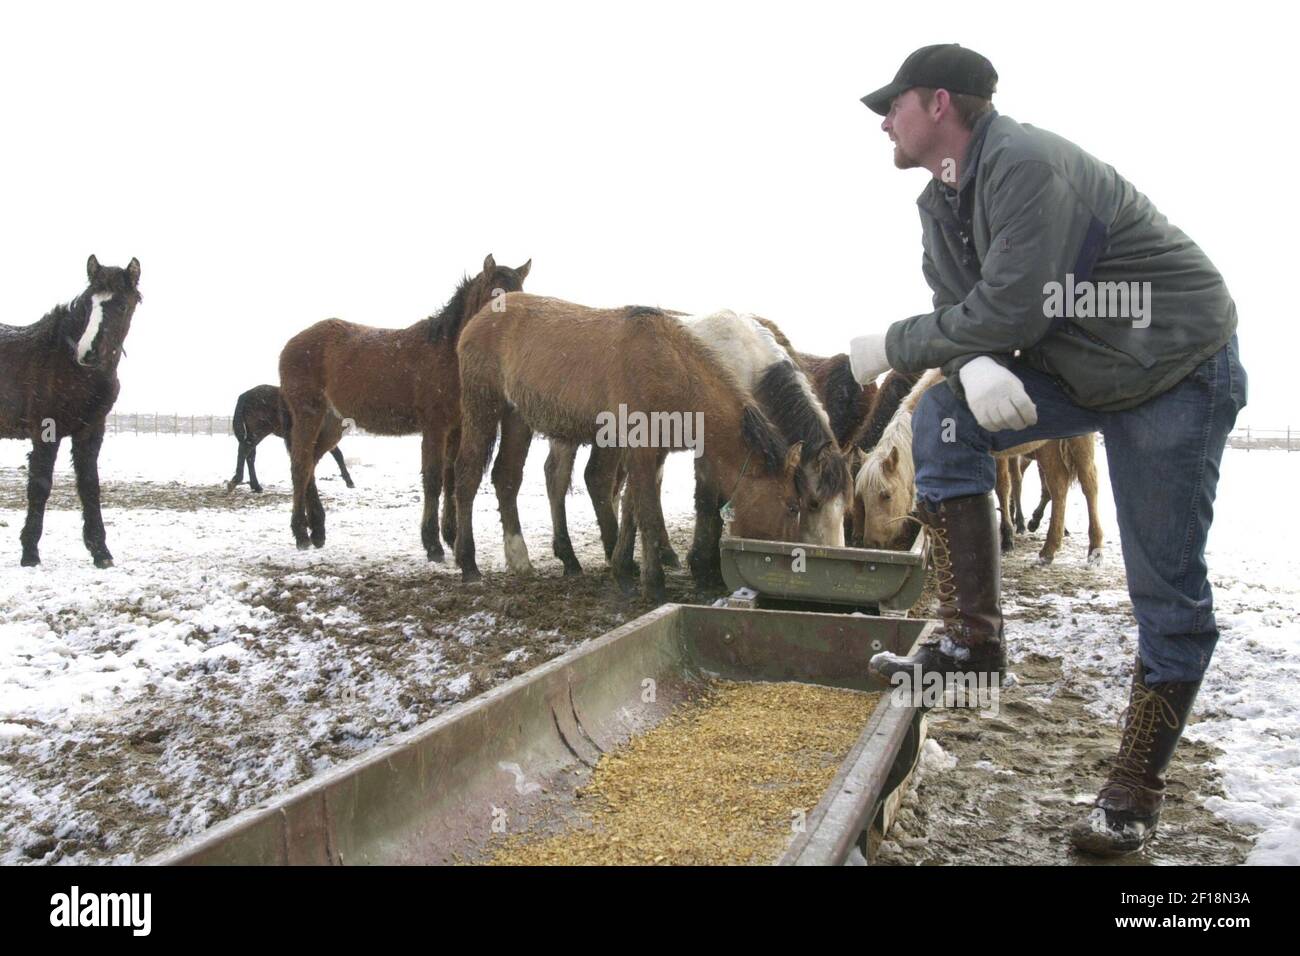 KRT US NEWS STORY SLUGGED: WILDHORSES KRT PHOTOGRAPH BY SHERRY  LAVARS/CONTRA COSTA TIMES (January 27) Wrangler Rocky Satica looks over  wild horses as others feed on the grounds of Bureau's Wild Horse